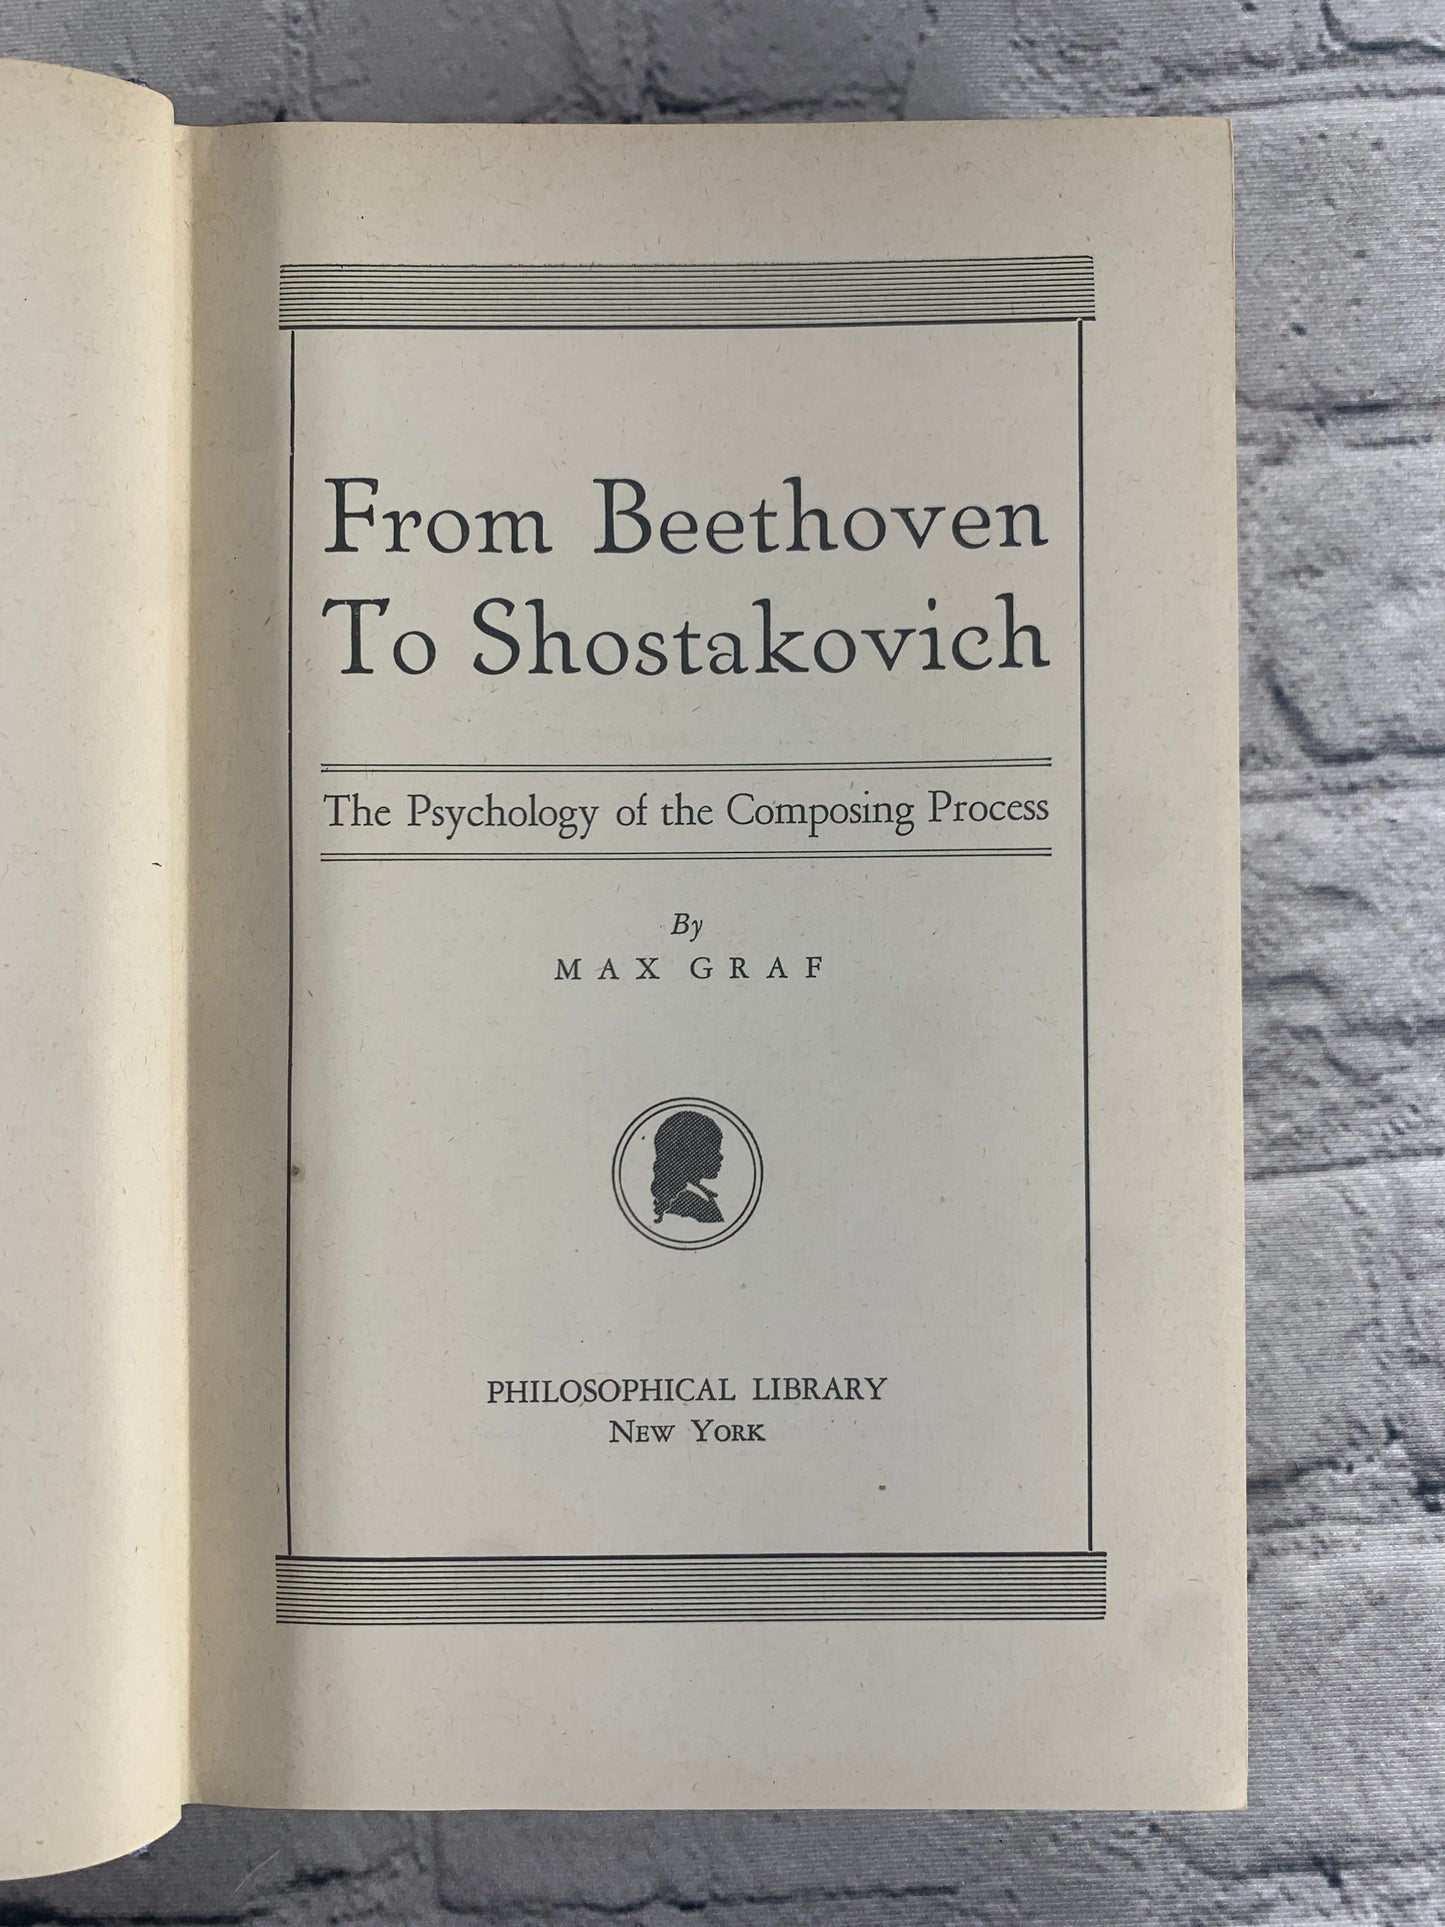 From Beethoven to Shostakovich: The Psychology of the Composing Process [1947]